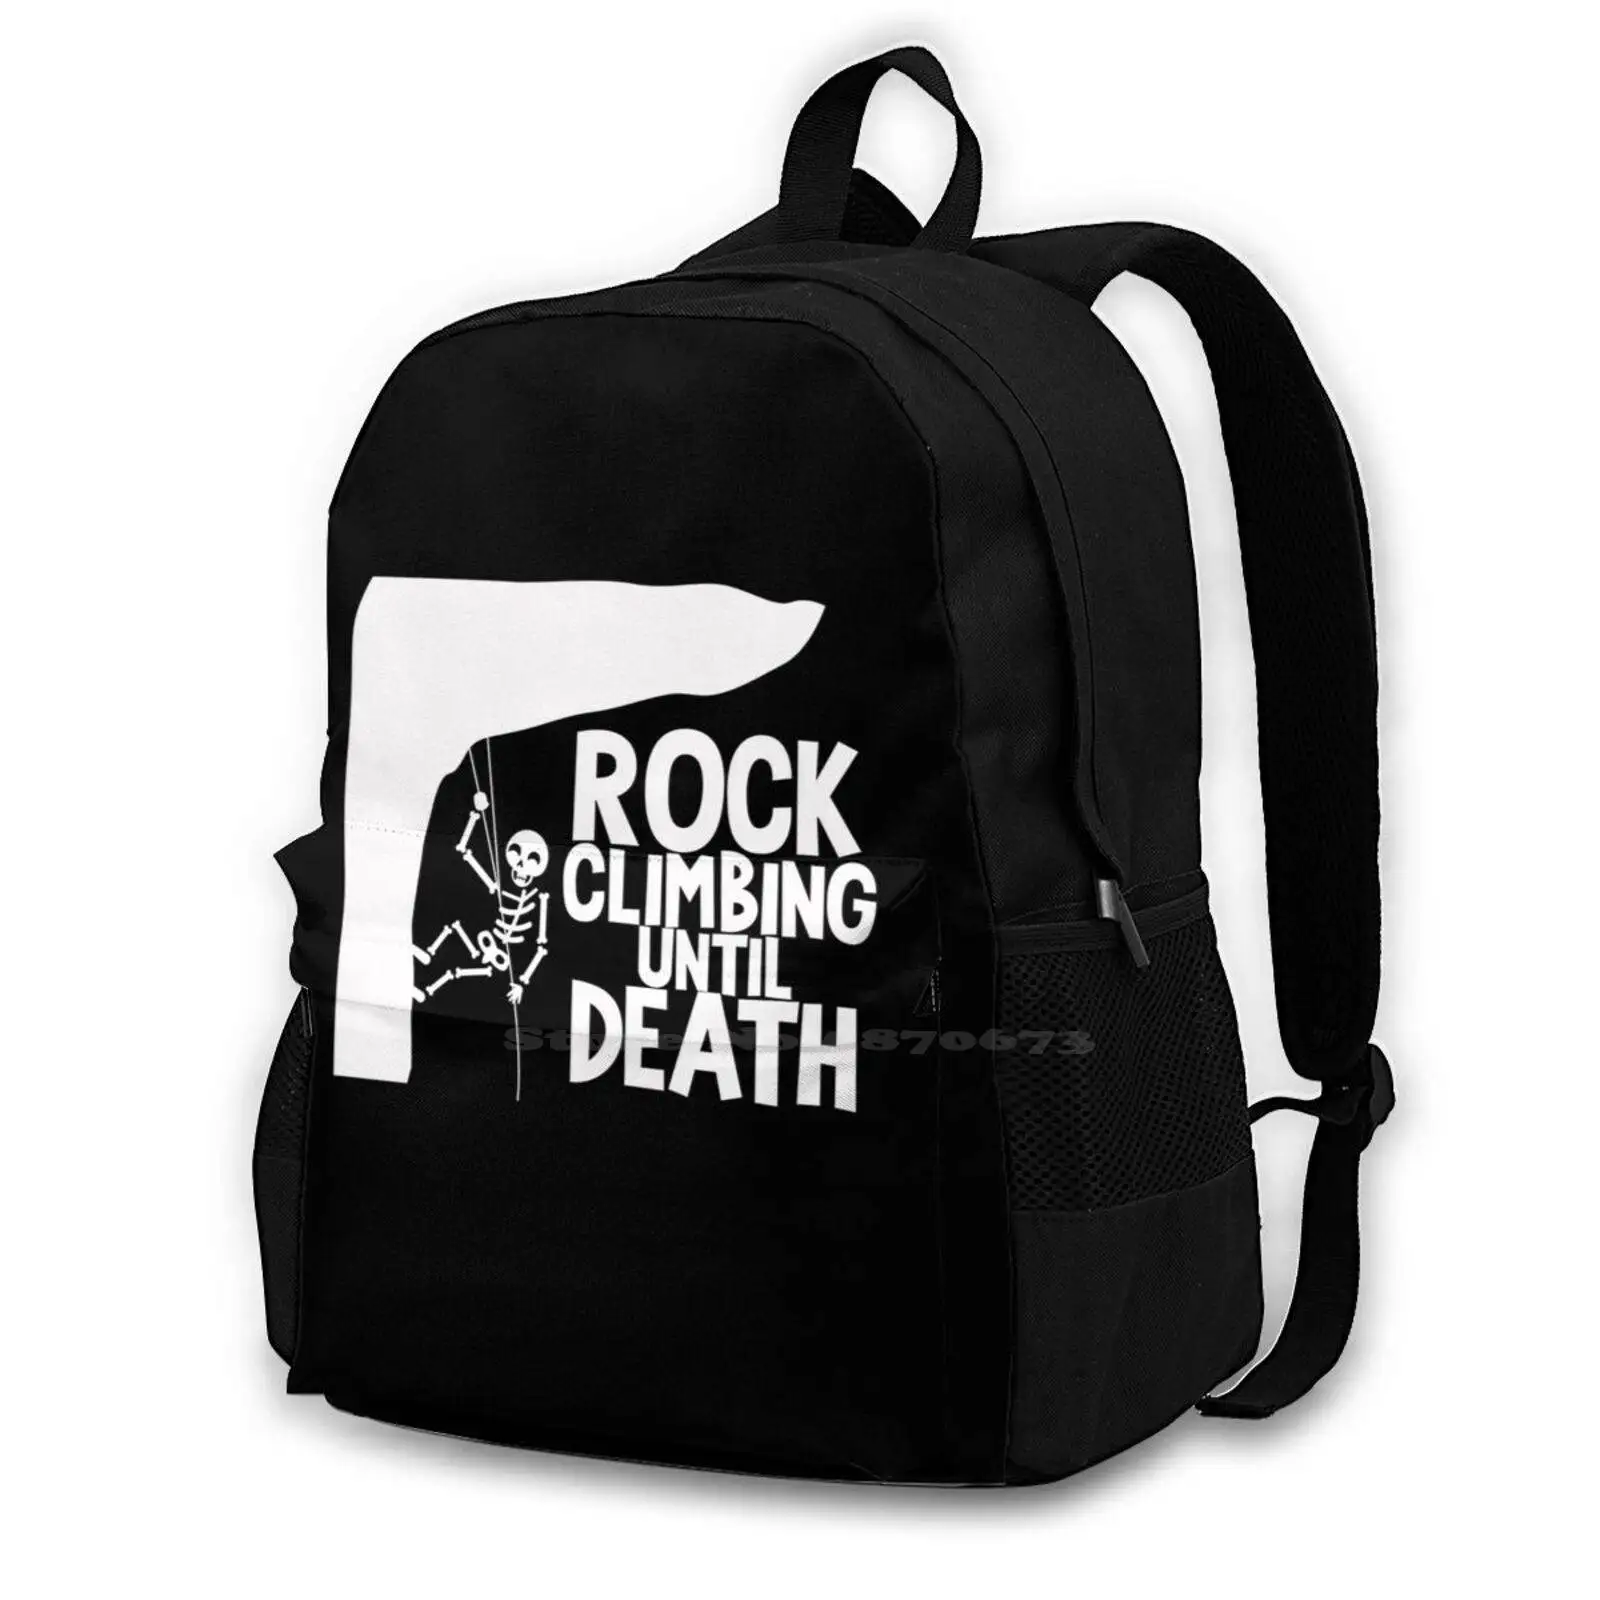 

Climbing Gift Mountaineer Climber Bouldering Fashion Bags Travel Laptop Backpack Boulder Boulderer Bouldering Climb Climber